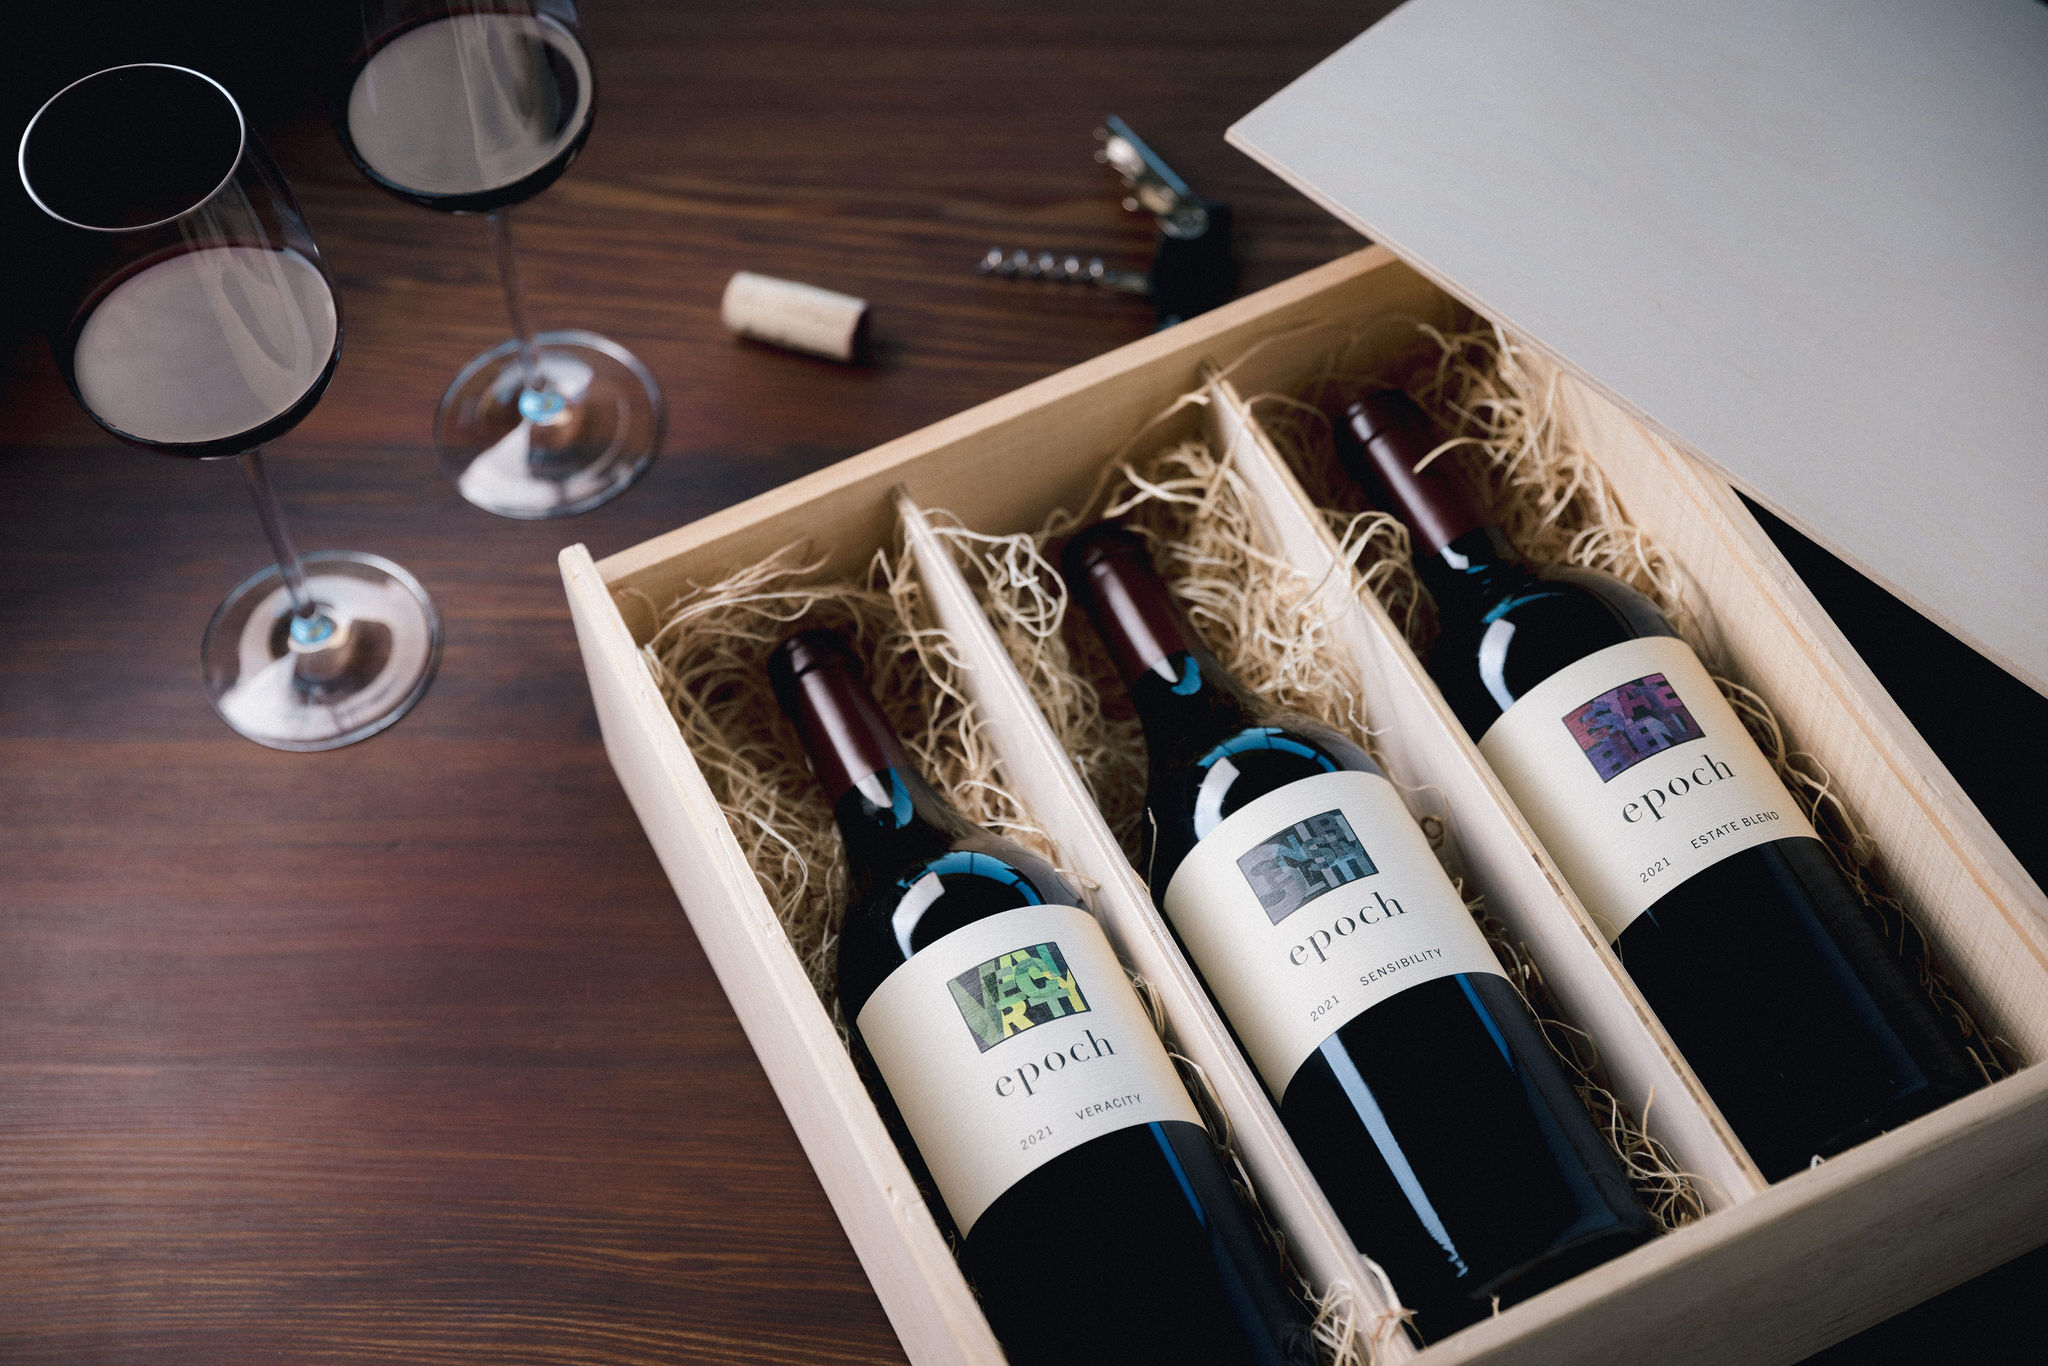 Wooden box with three bottles of Epoch wines inside